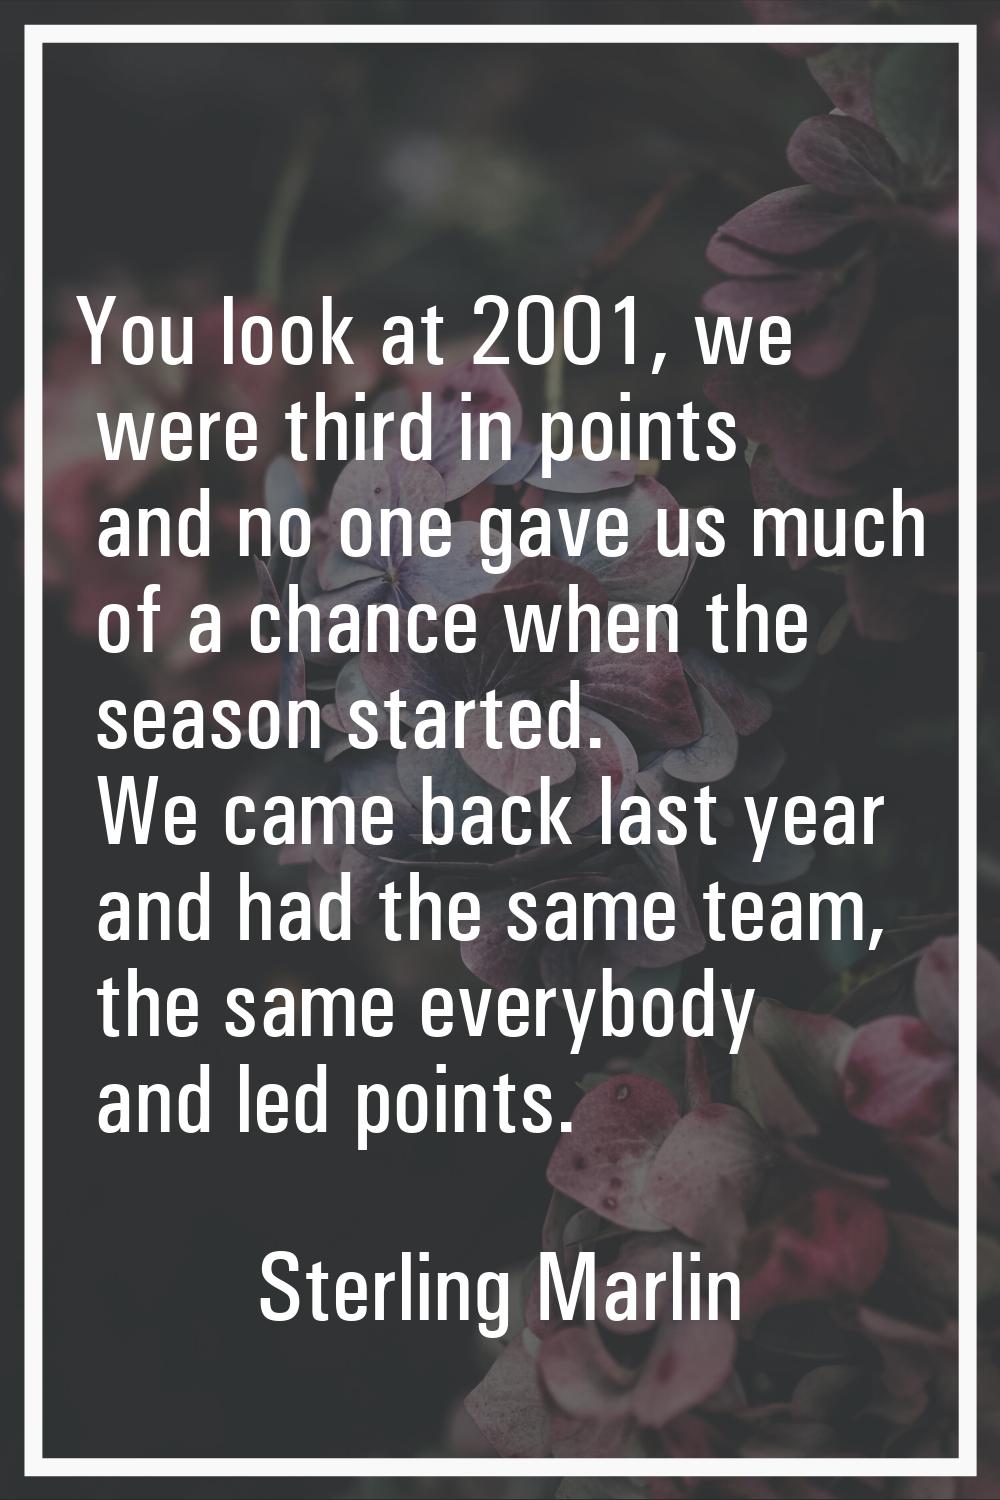 You look at 2001, we were third in points and no one gave us much of a chance when the season start